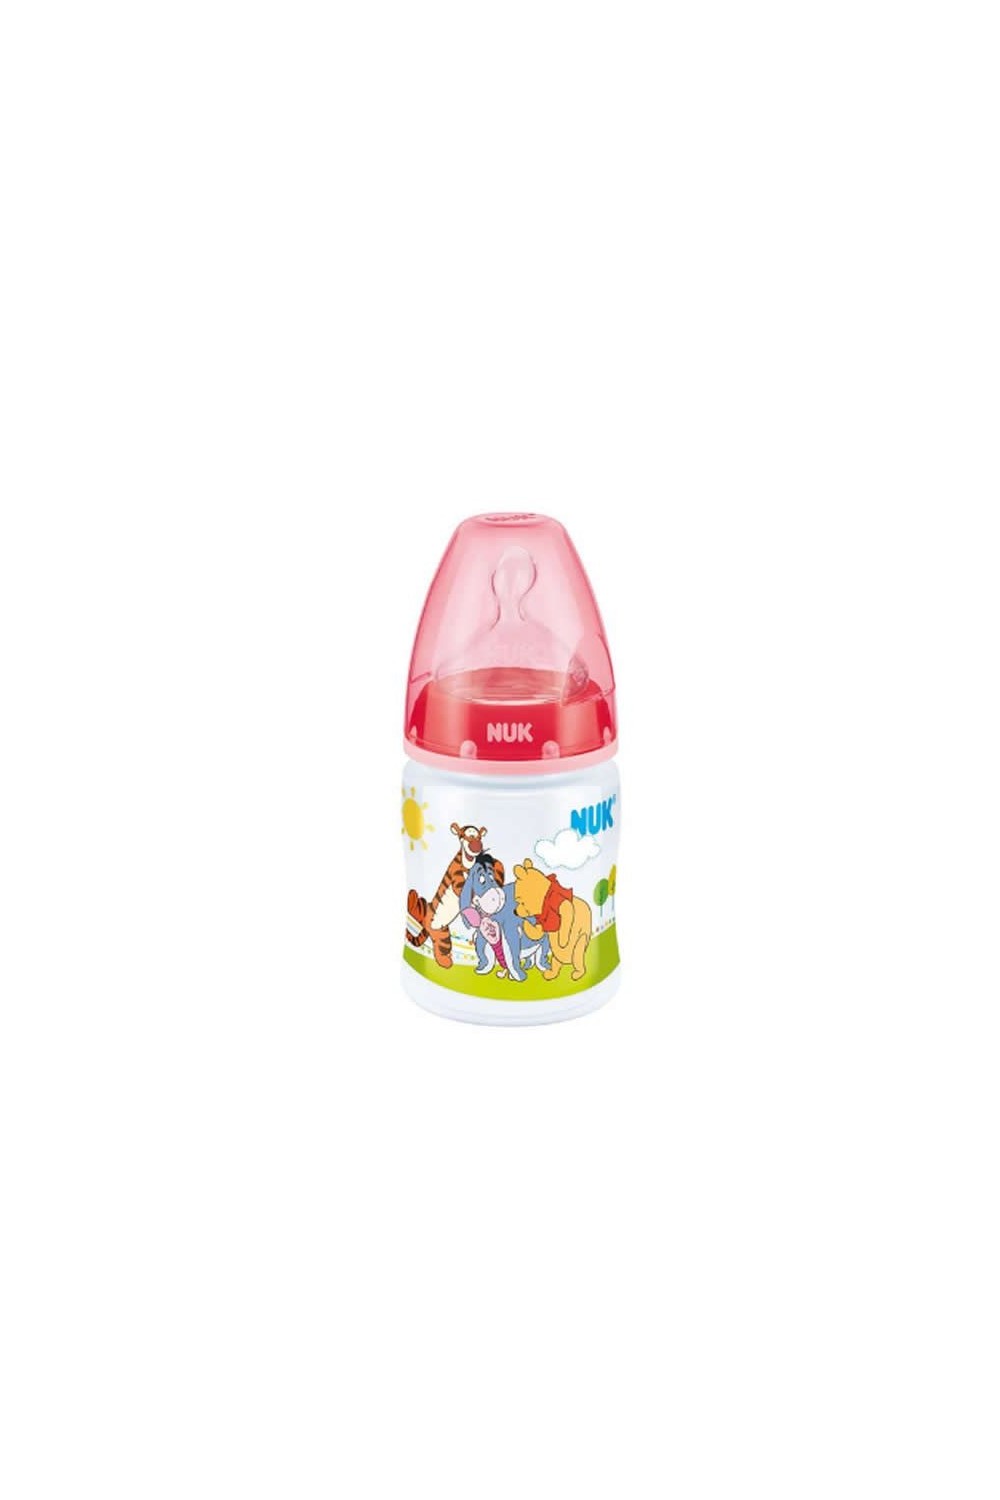 Nuk Bottle First Choice Winnie The Pooh Latex S1 1 M (milk) 0 to 6 Months 150ml